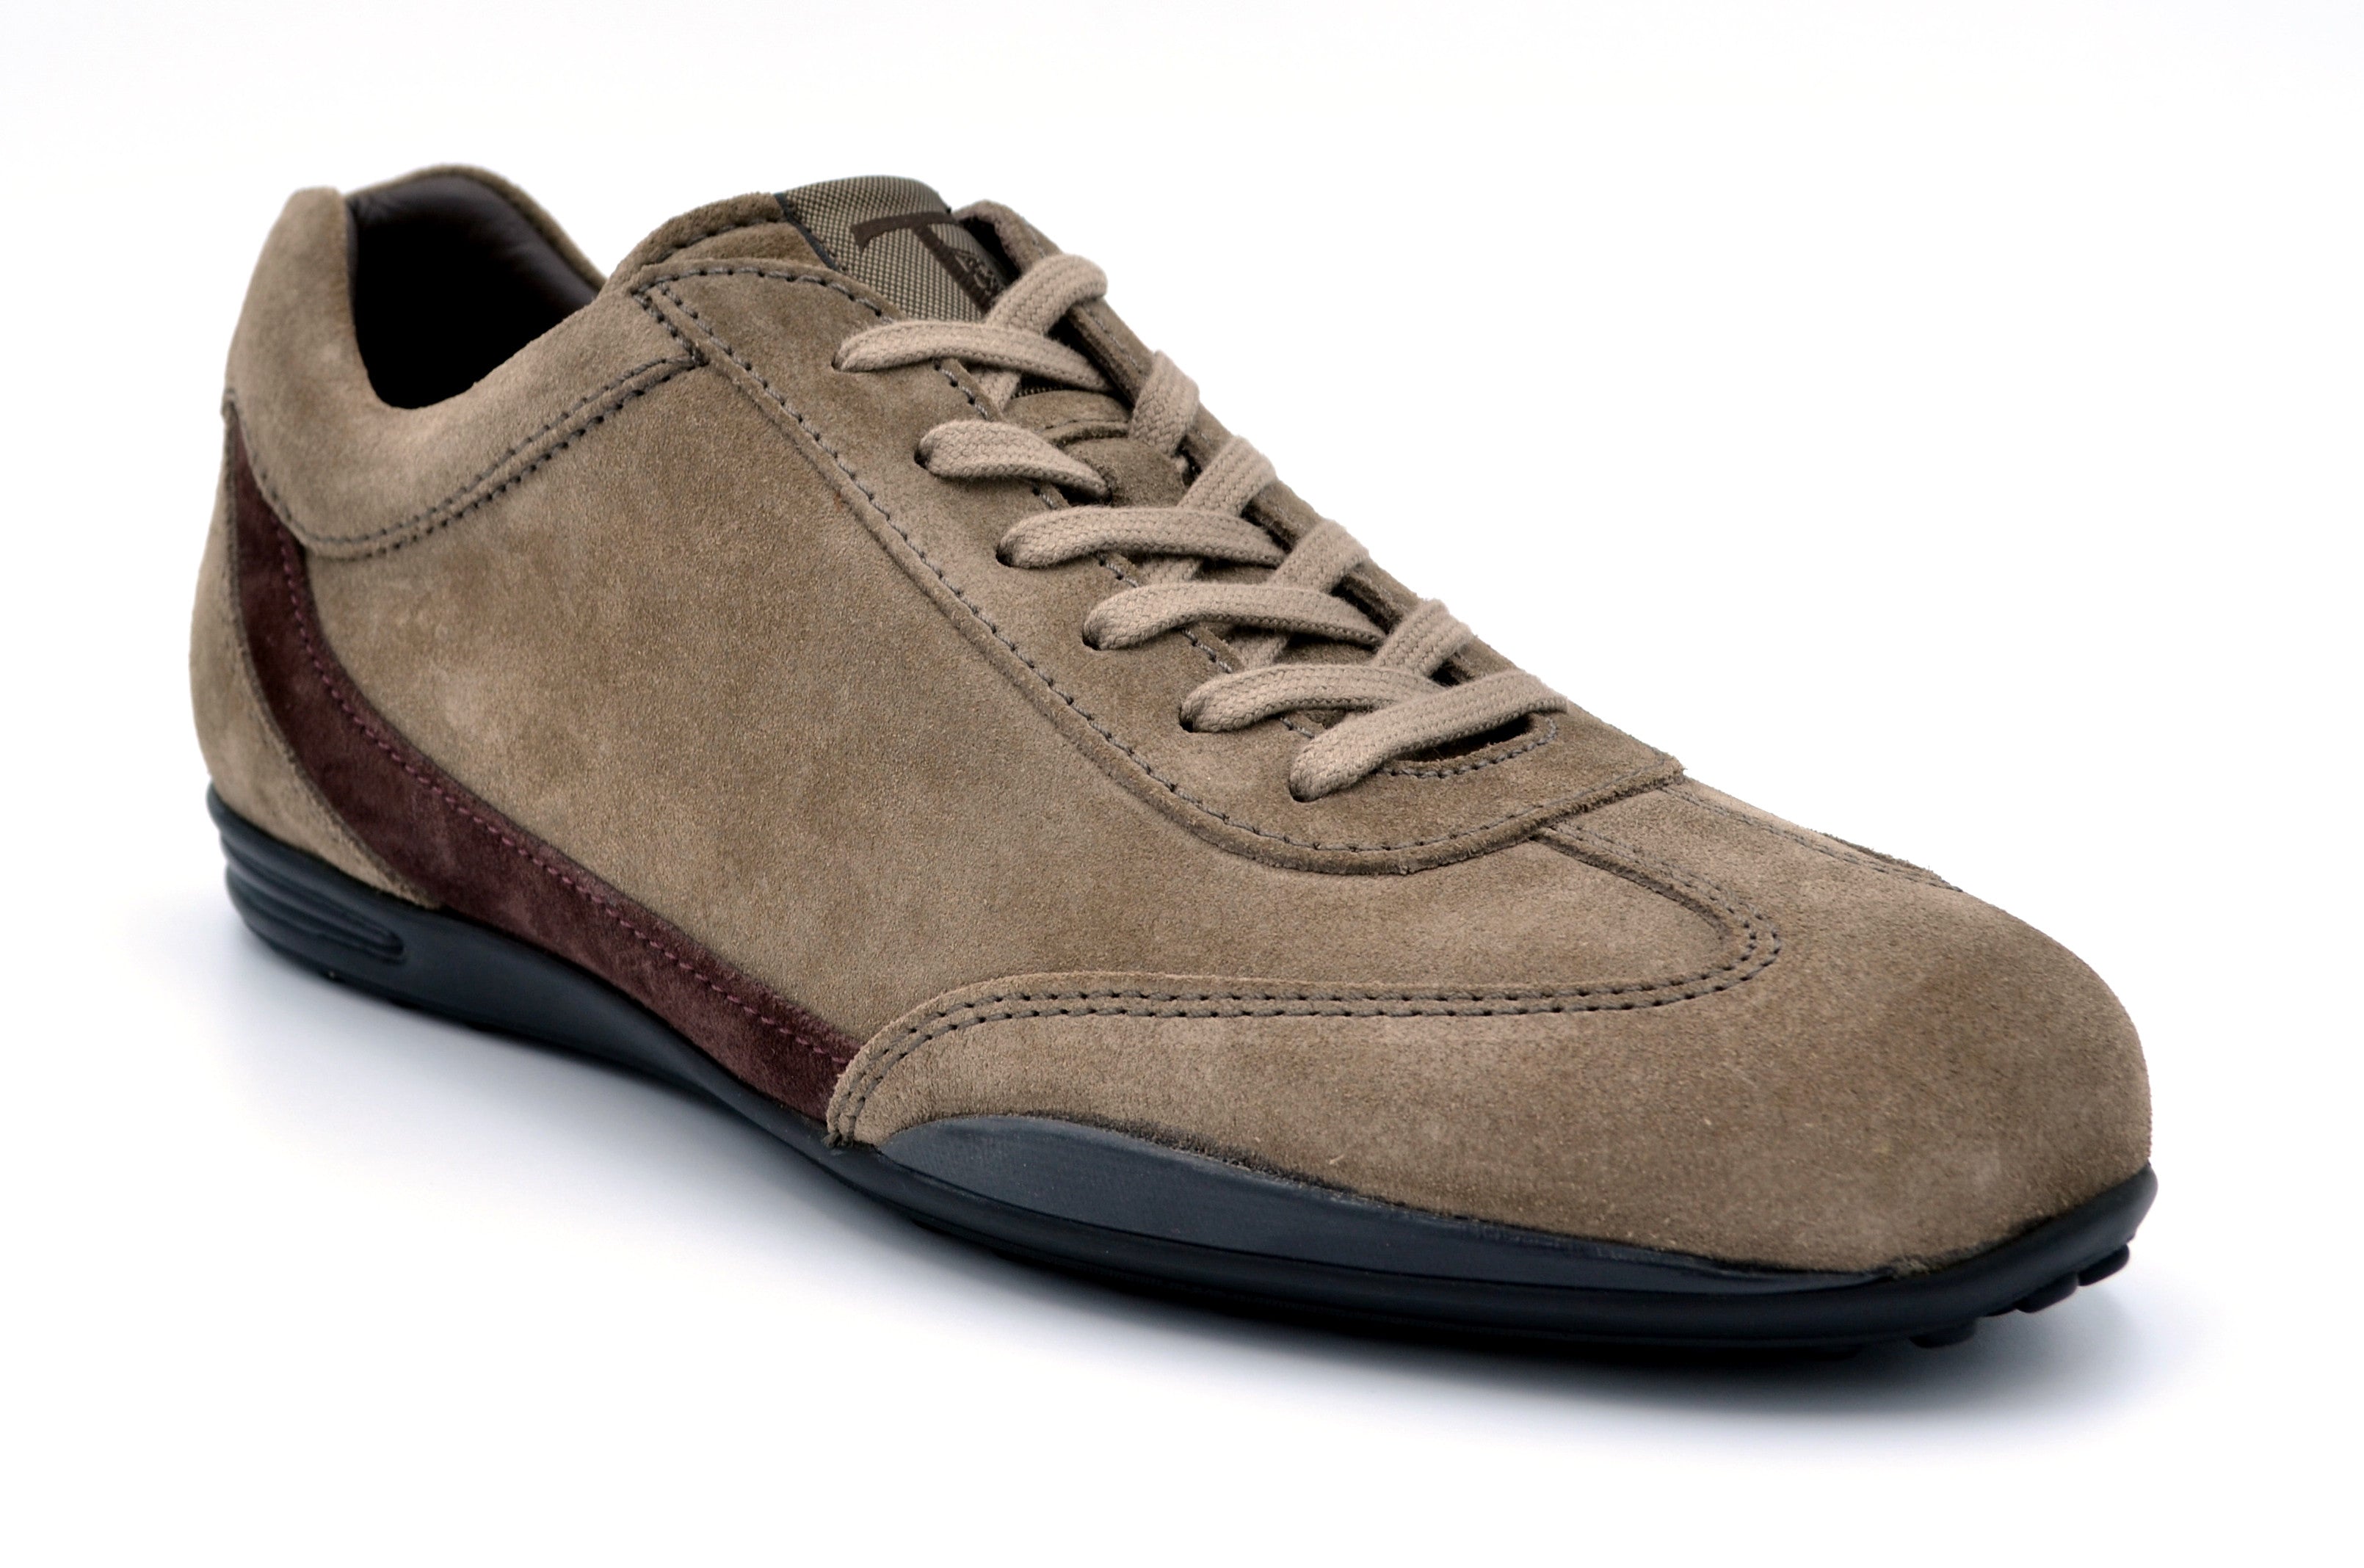 Urban Project light suede